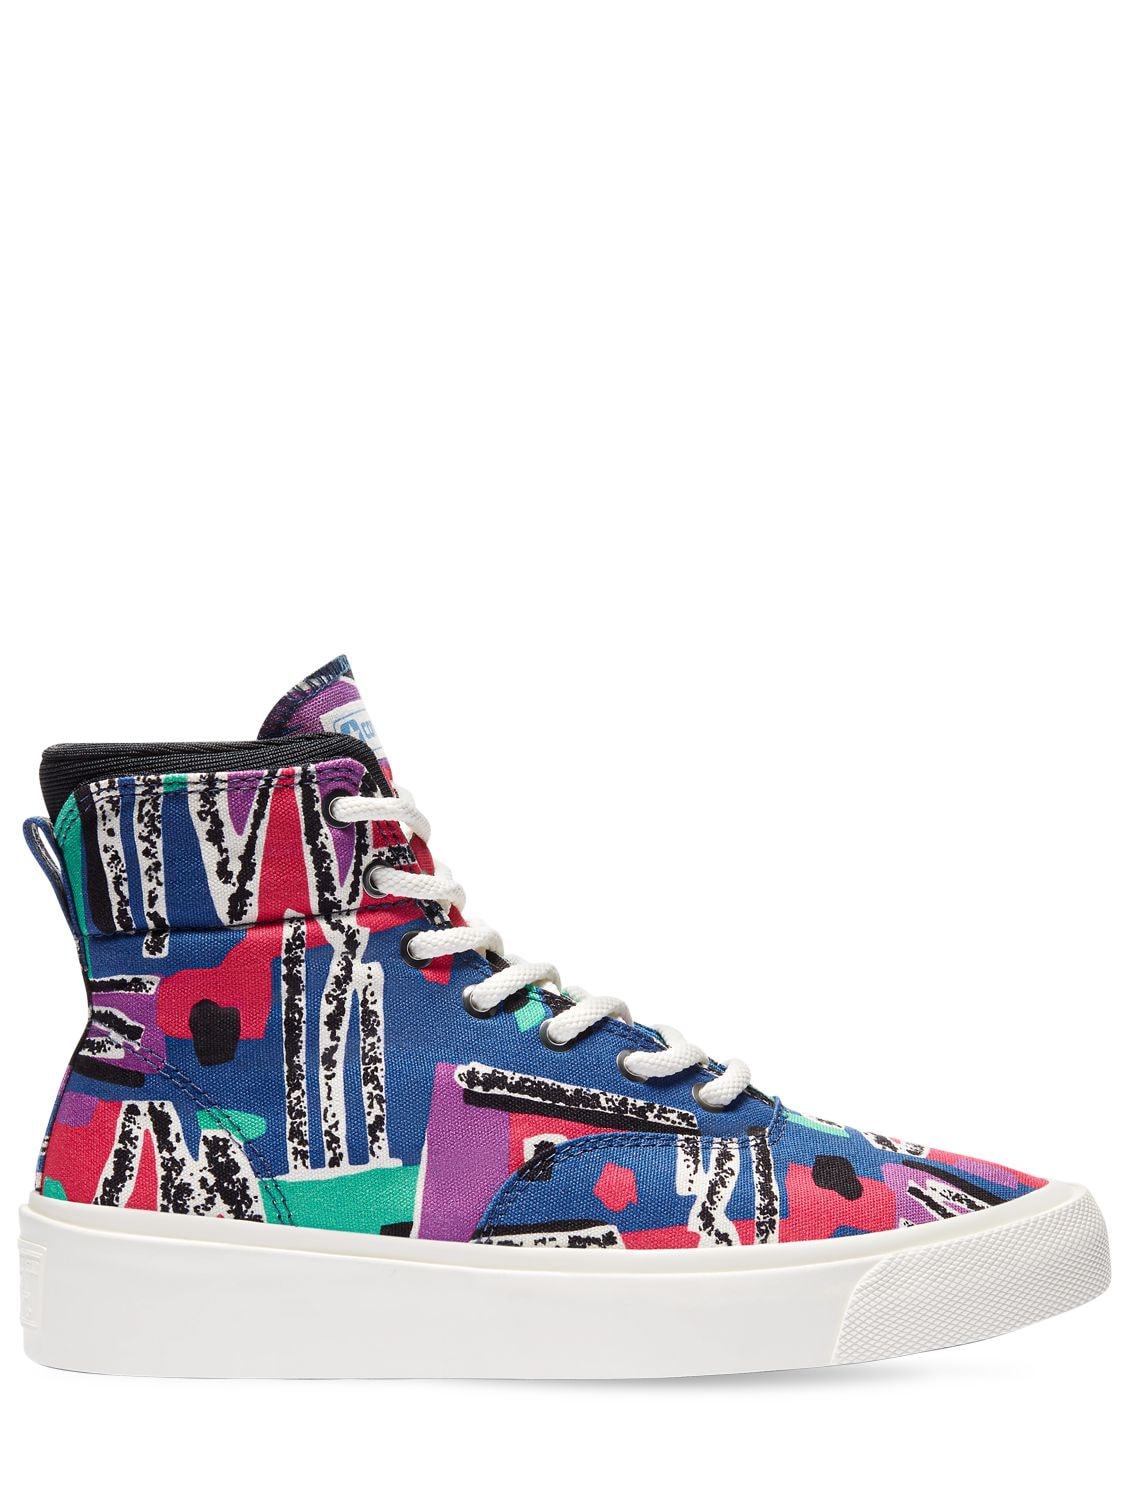 Converse Fear Of God Essentials Skidgrip Sneakers In Multicolor